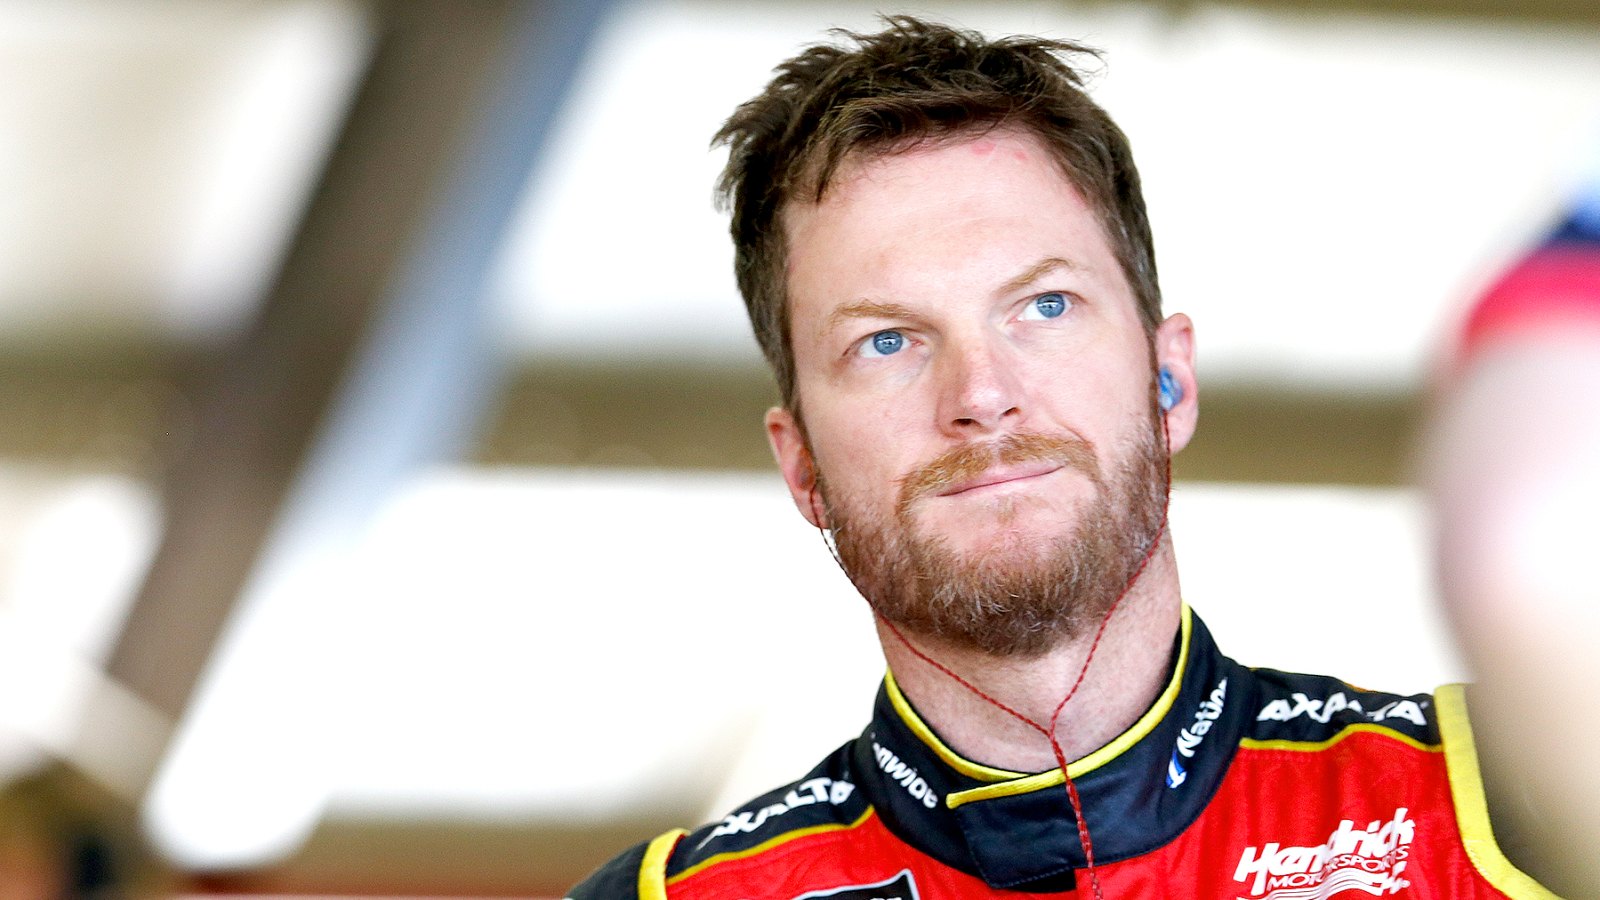 Dale Earnhardt Jr, driver of the #88 Axalta Chevrolet, stands in the garage during practice for the Monster Energy NASCAR Cup Series Auto Club 400 at Auto Club Speedway on March 24, 2017 in Fontana, California.